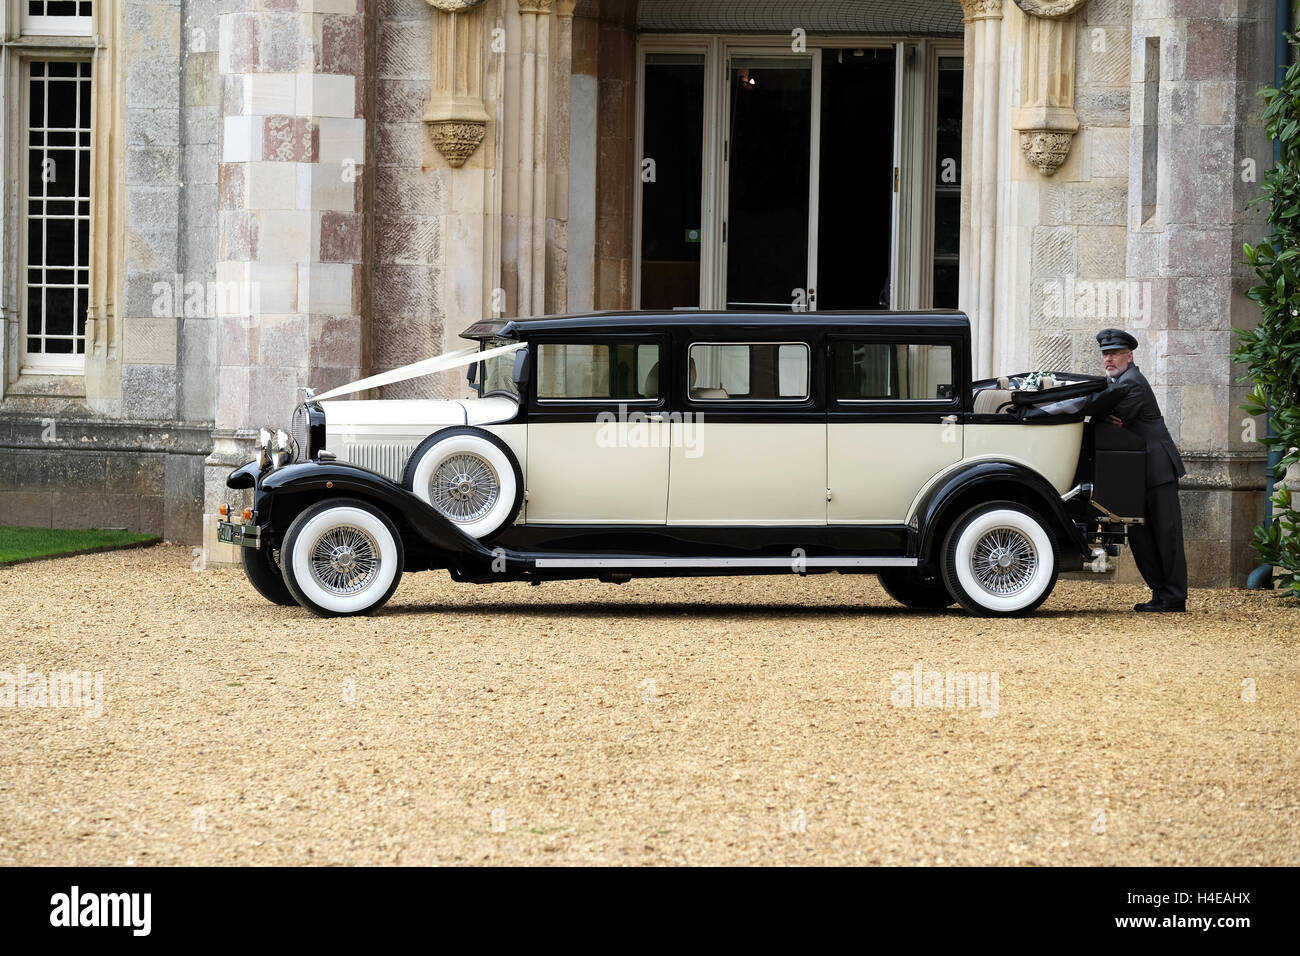 A uniformed chauffeur leans against the back of a classic vinate ford wedding car, waiting the arrival of the bride and groom Stock Photo